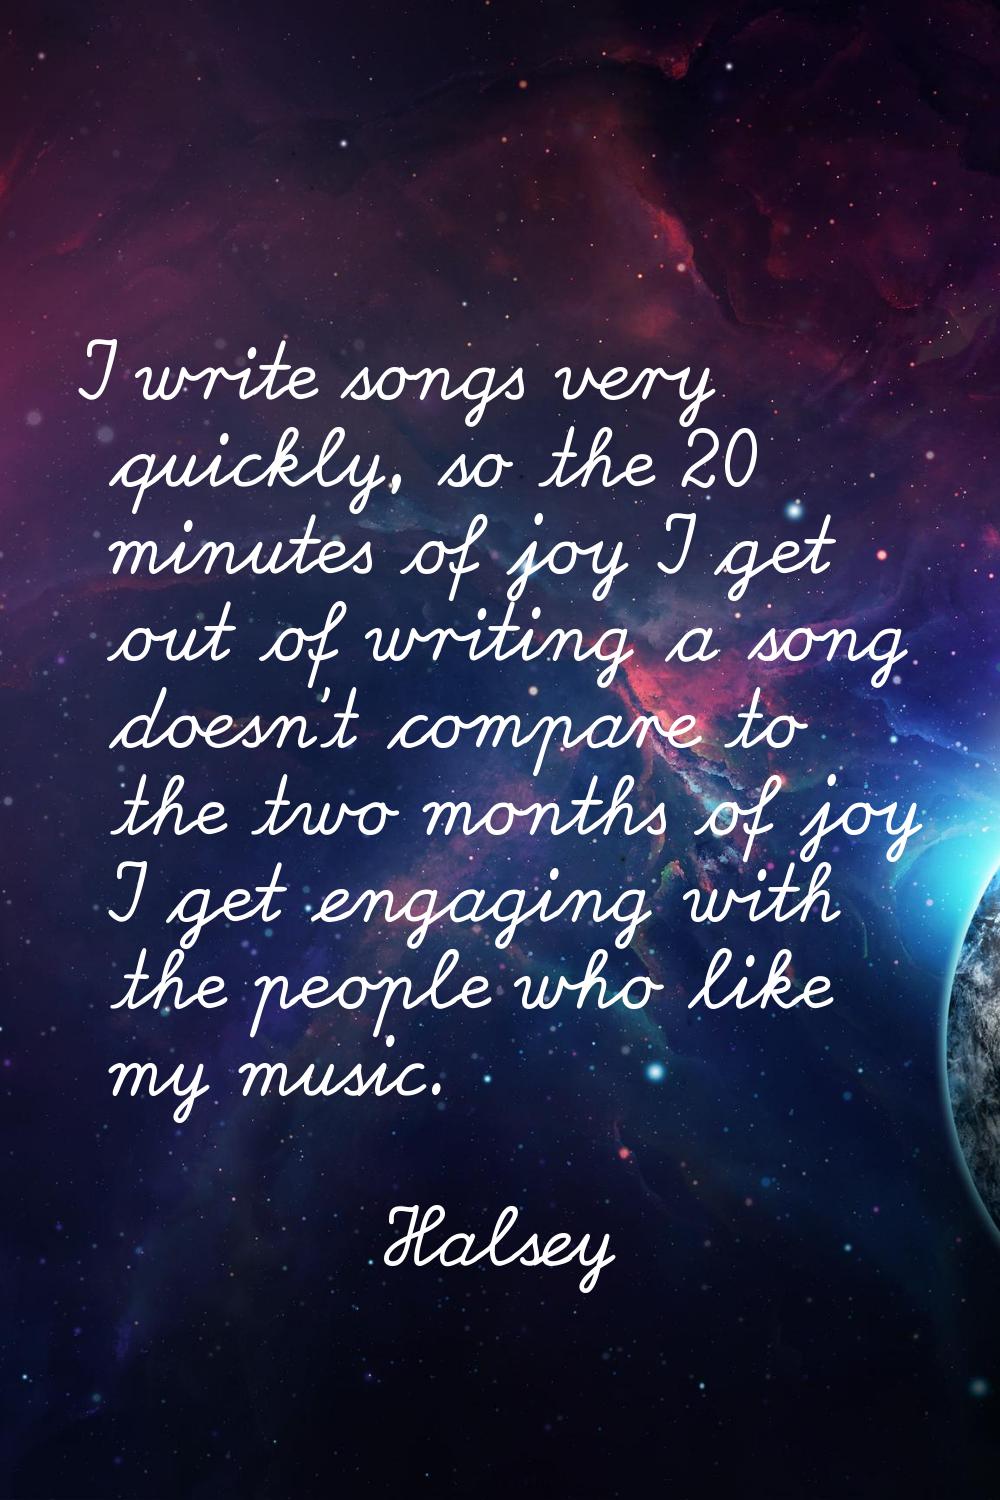 I write songs very quickly, so the 20 minutes of joy I get out of writing a song doesn't compare to